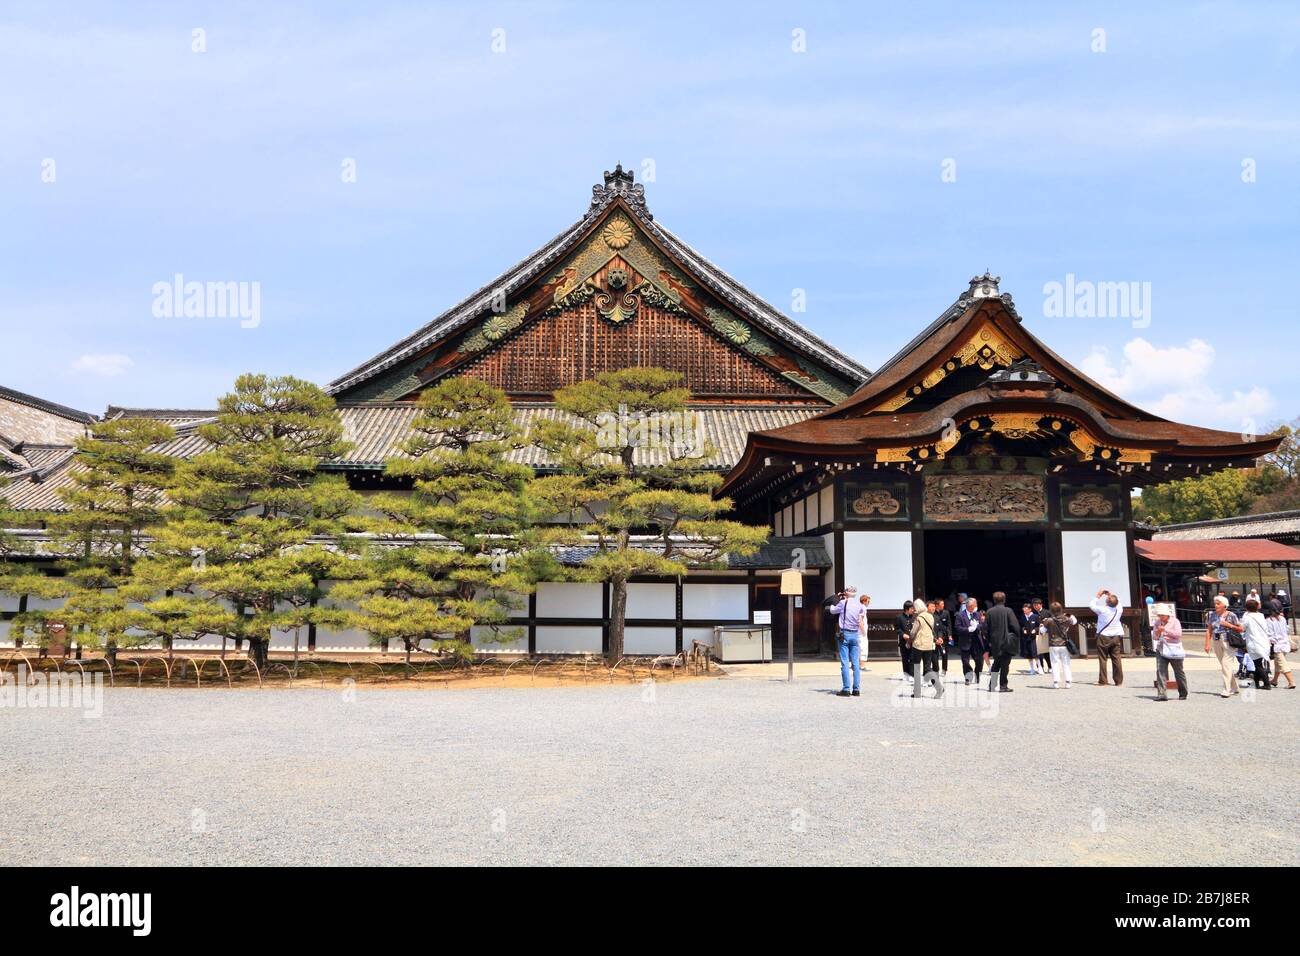 KYOTO, JAPAN - APRIL 19, 2012: Tourists visit Nijo Castle in Kyoto, Japan. Old Kyoto is a UNESCO World Heritage site and was visited by almost 1 milli Stock Photo